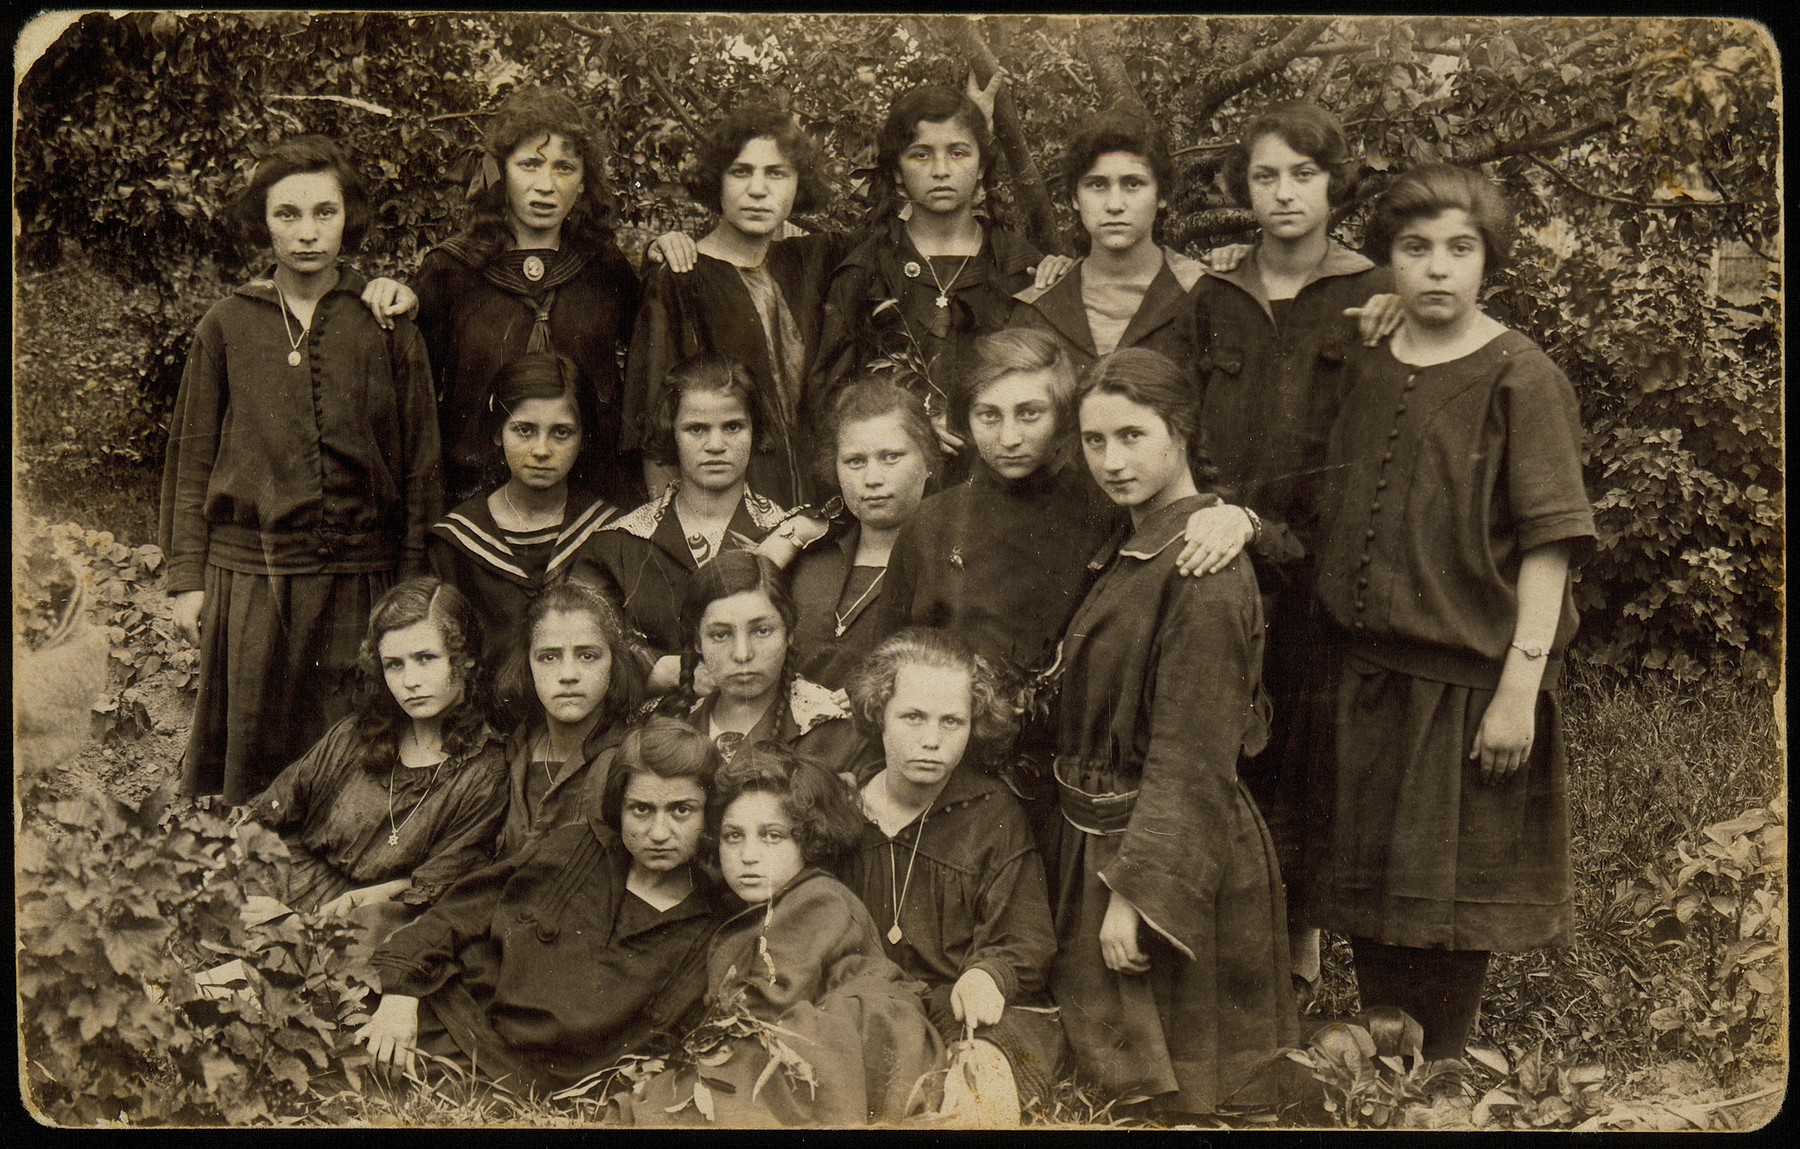 Group portrait of teenage girls beloning to a social group known as the 21 Club. 

In 1921, twenty-one teenage girls, all Hebrew students established an apolitical friendship society and named it  Club 21.  Their younger sisters decided to establish a similar club, simply named Our Circle.  Many of these young women emigrated or moved to larger towns during the 1930s. 

Among the Club 21 members: Mattle Sonenson (front right) and her best friend Geneshe Kaganowicz; Zipporah Katz (third row, second from right);  Leah Koppelman (top row, fourth from right).